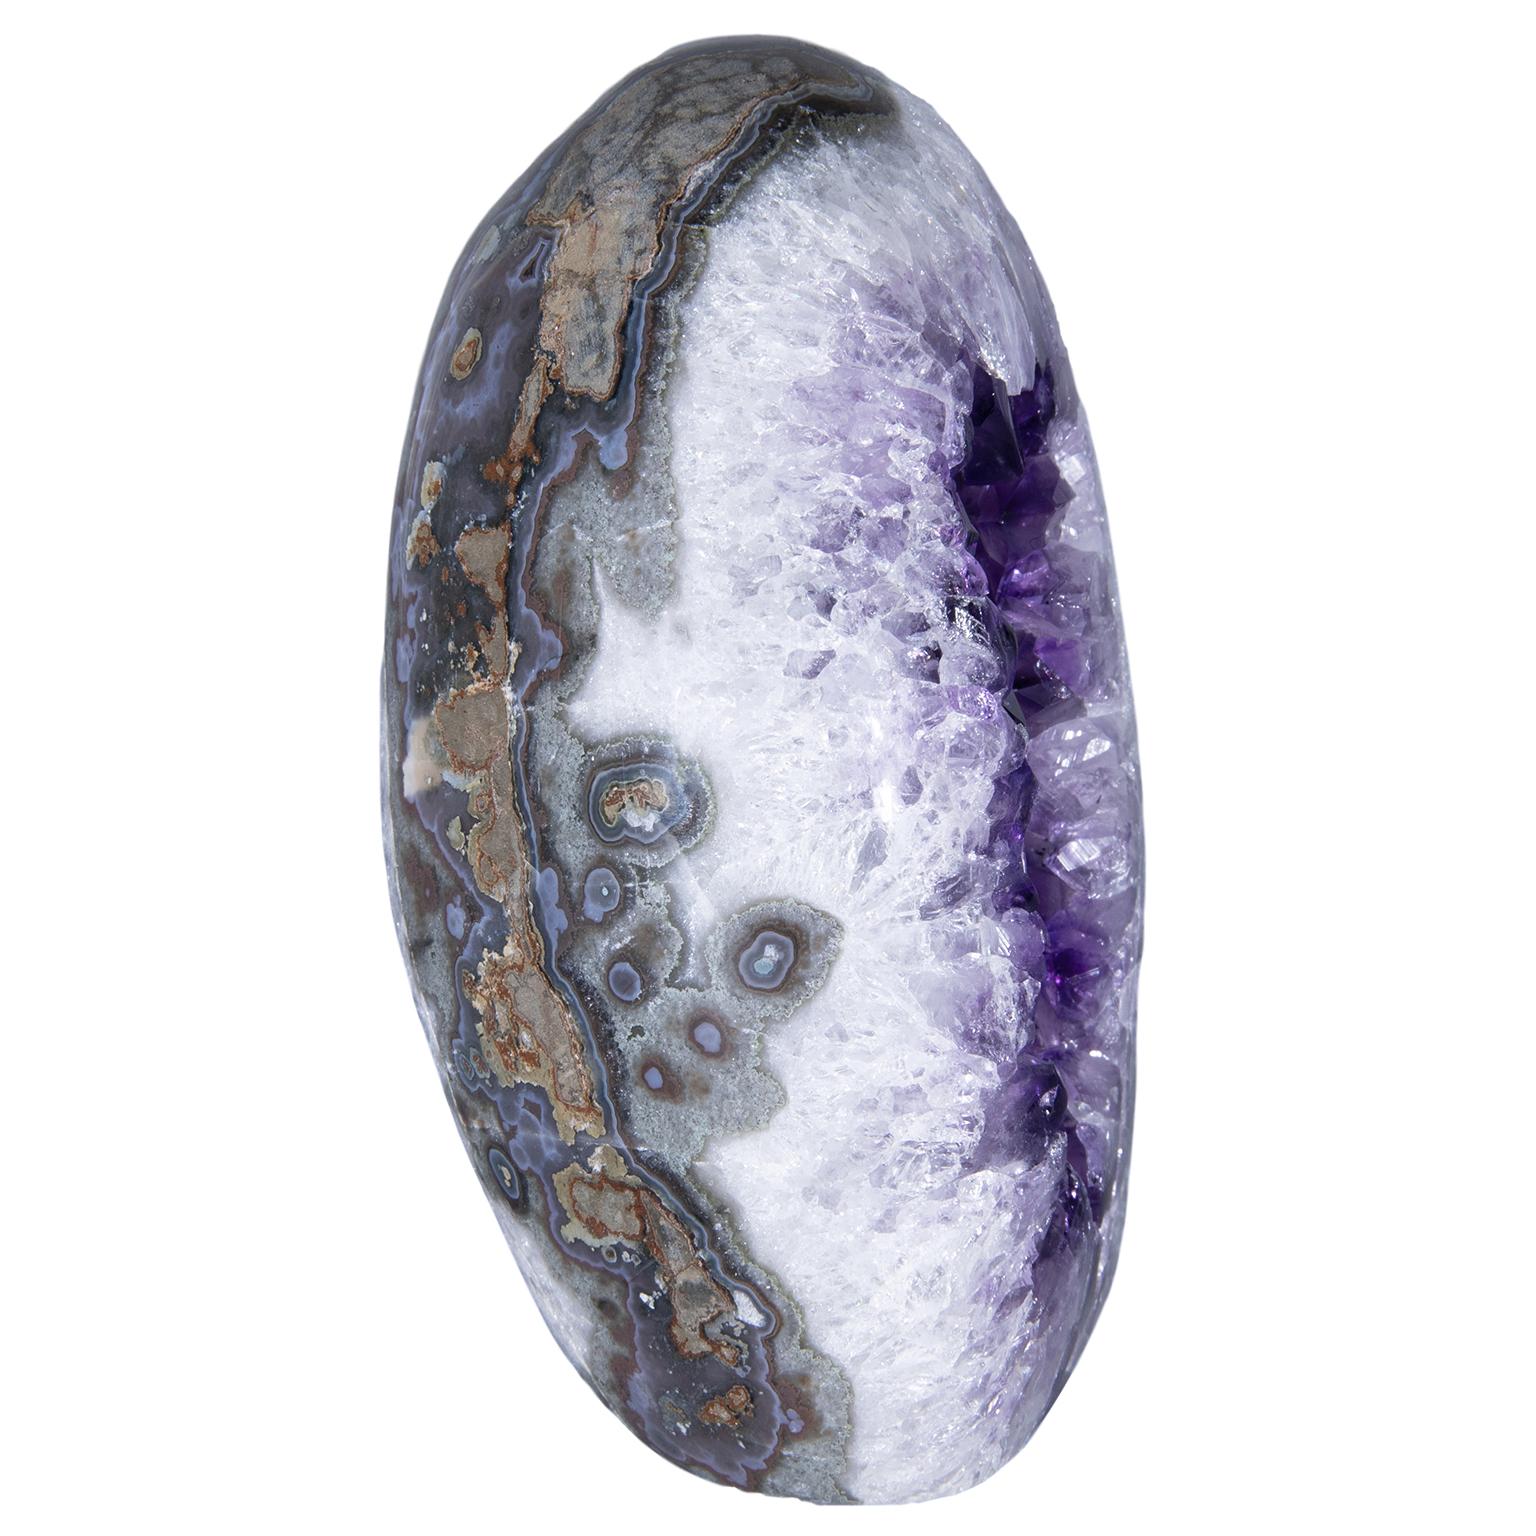 Uruguayan Polished Amethyst Egg Geode Surrounded by White Quartz and Agate Crystals